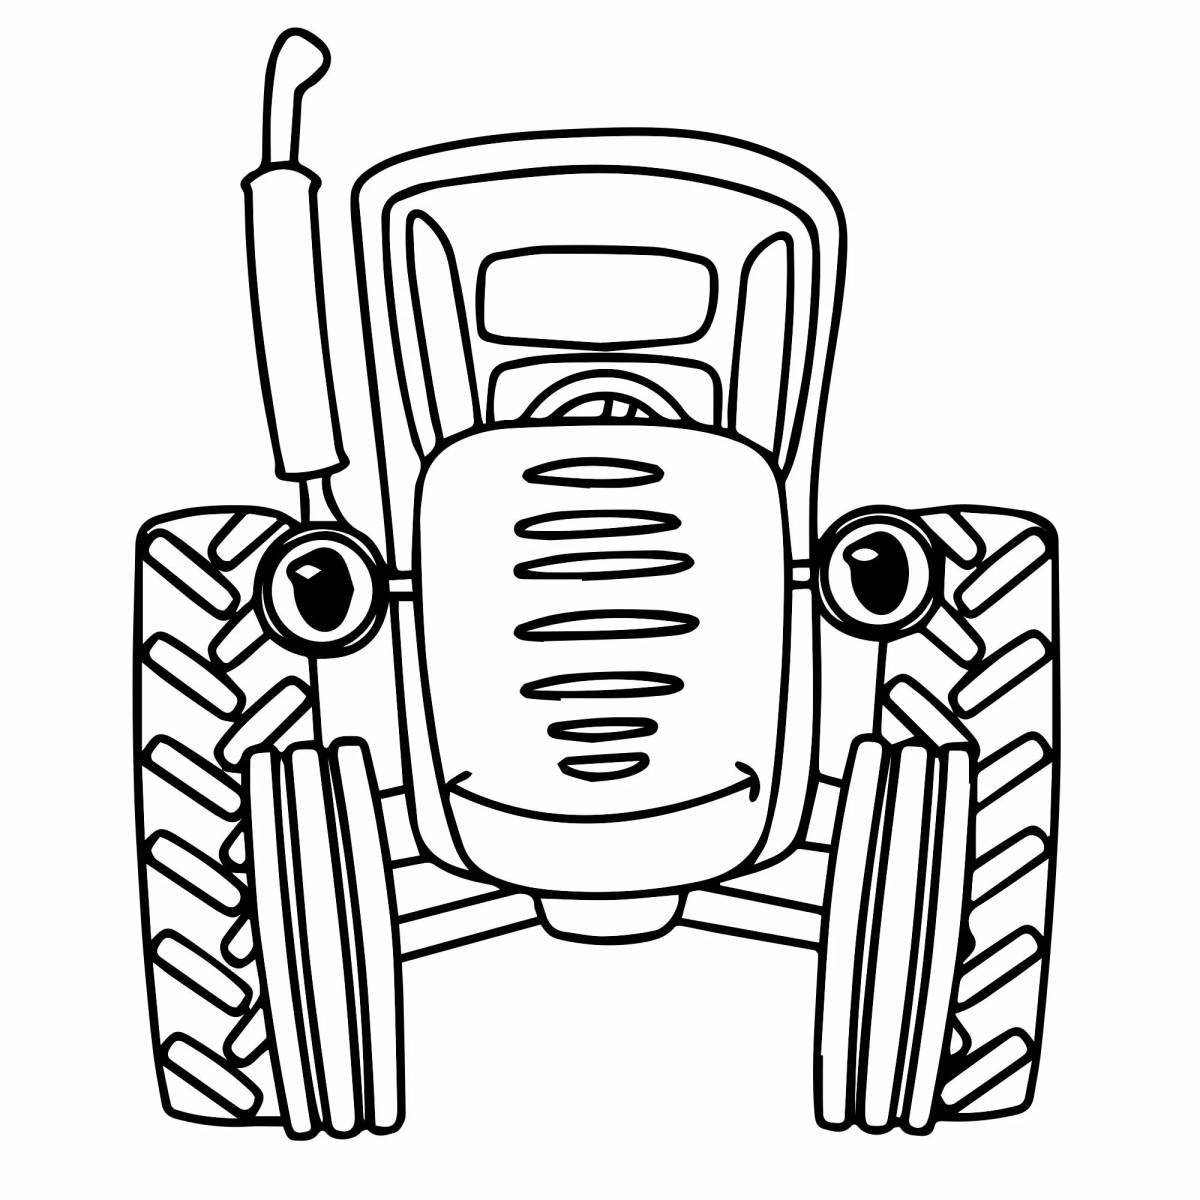 Glowing tractor coloring page